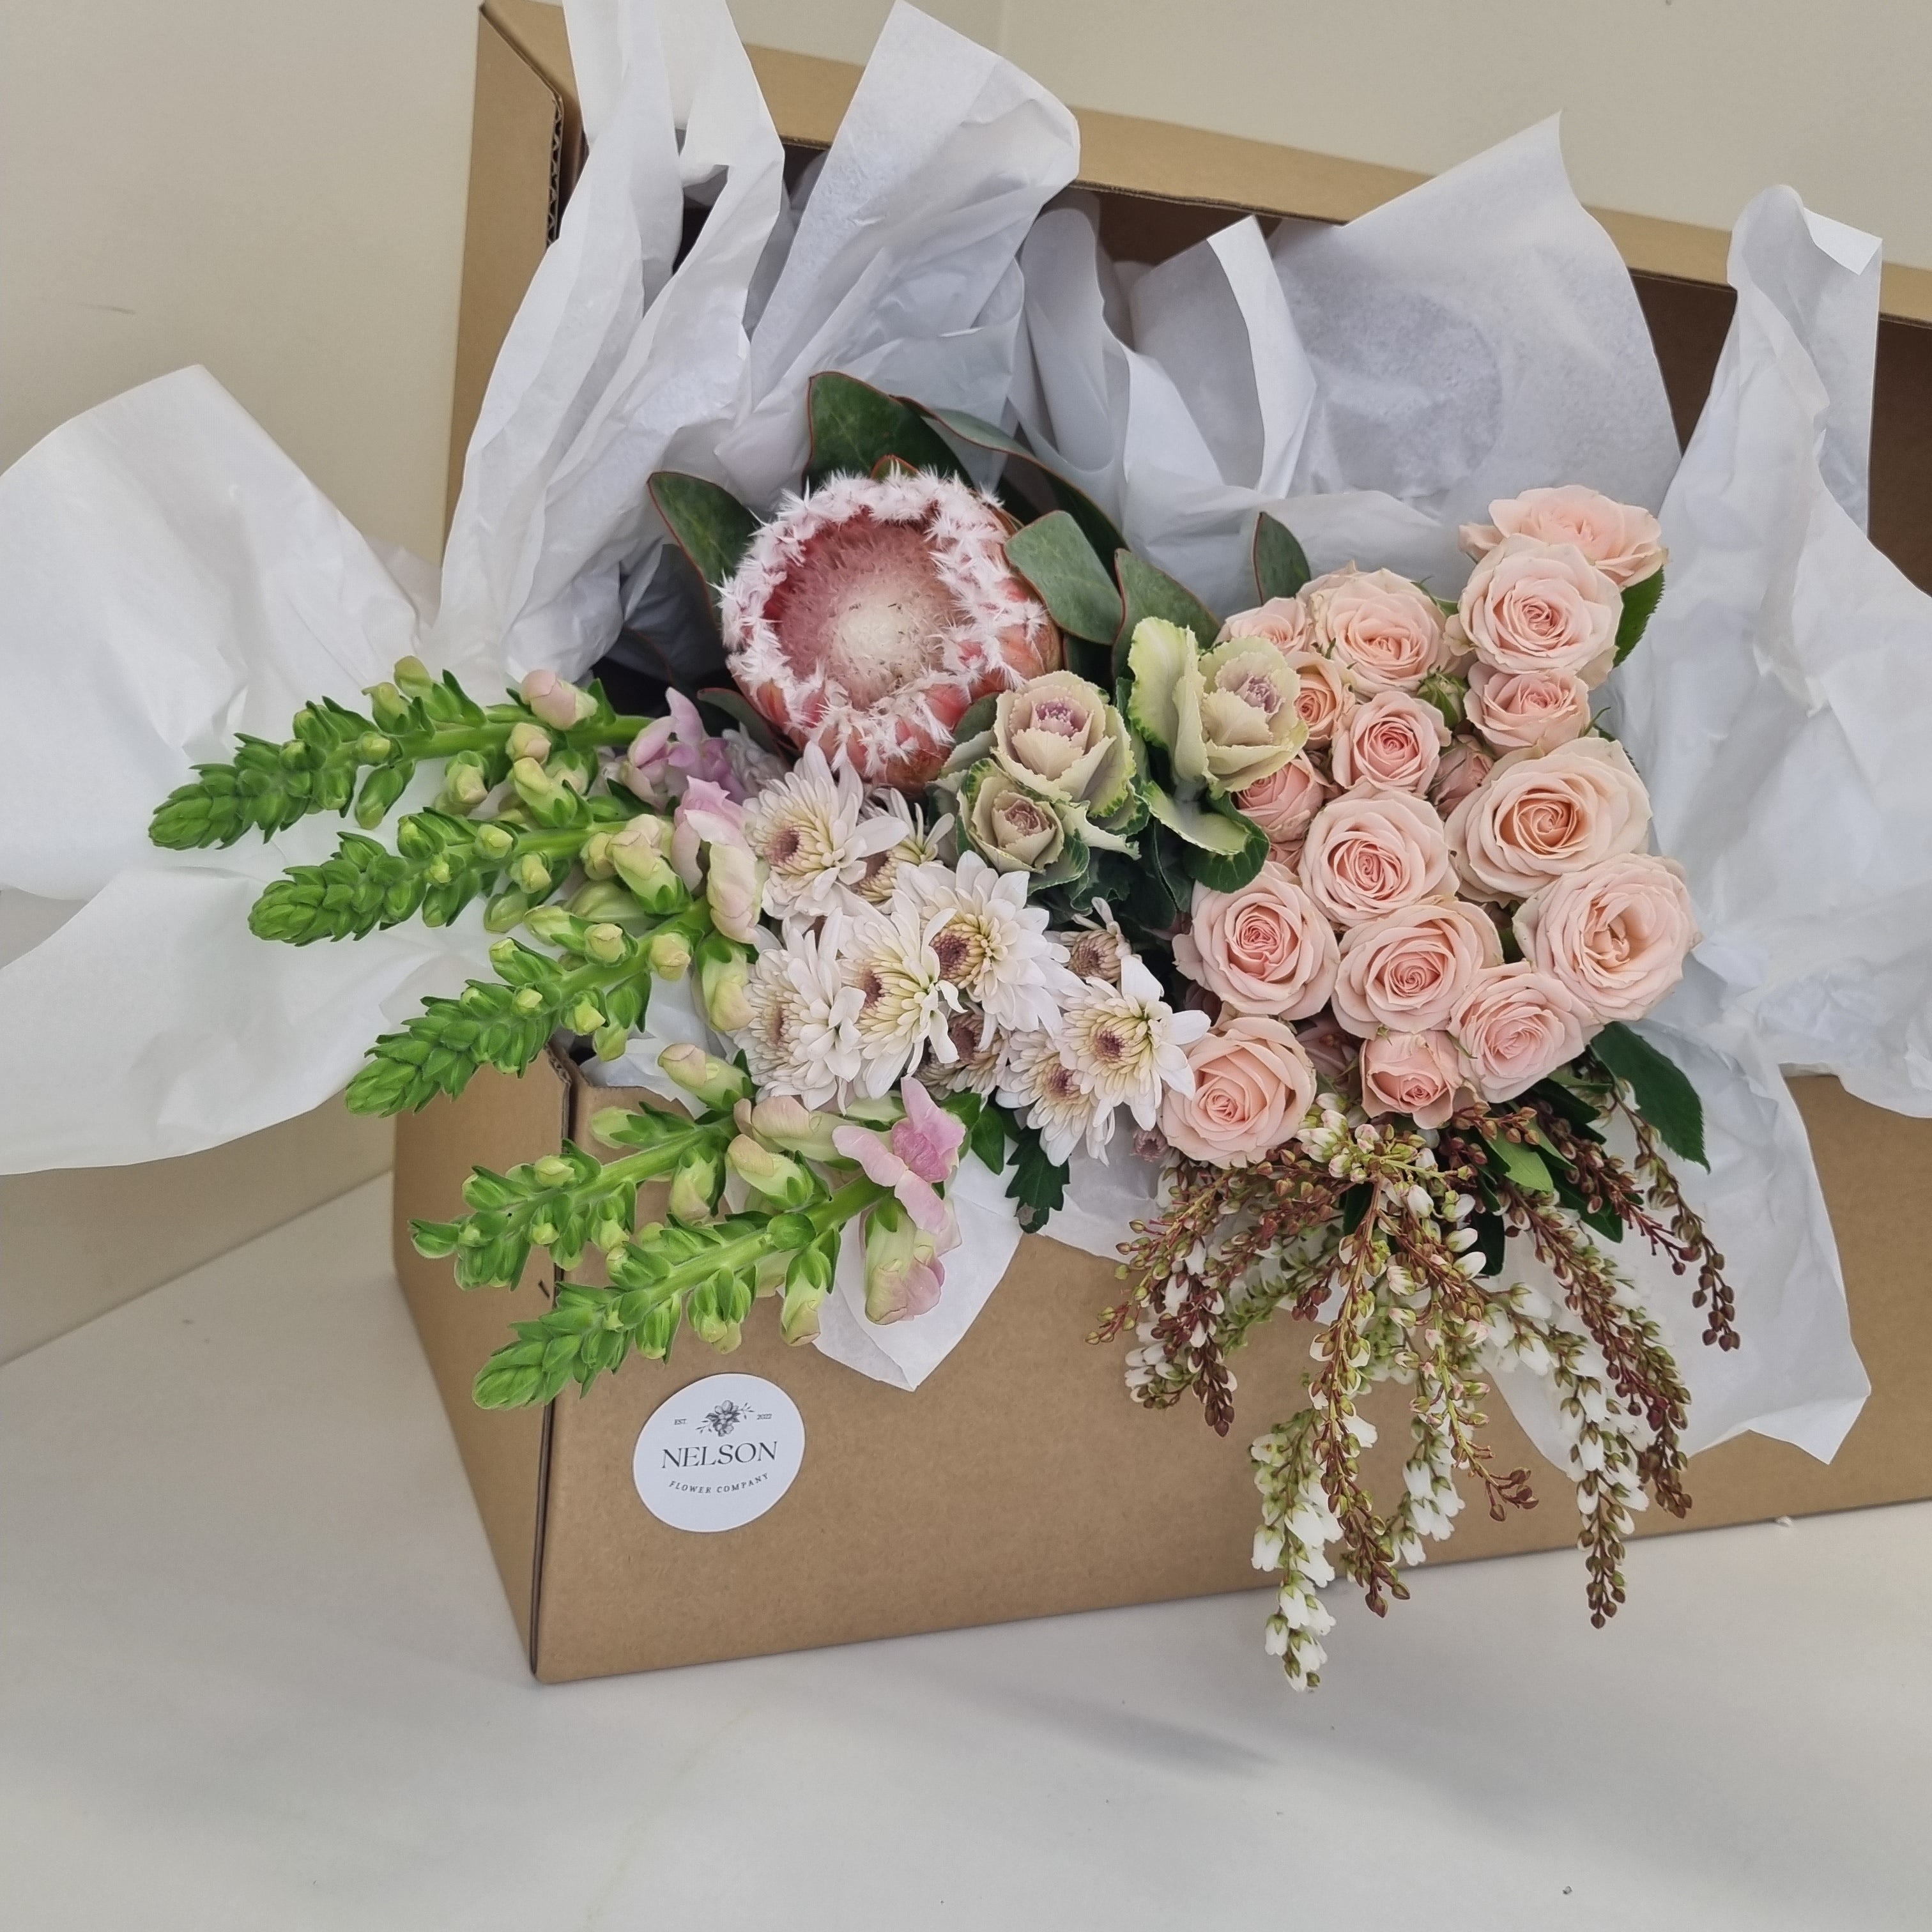 Soft &amp; Sweet Fresh Flower Box, with greenery in a cardboard box with white tissue paper.